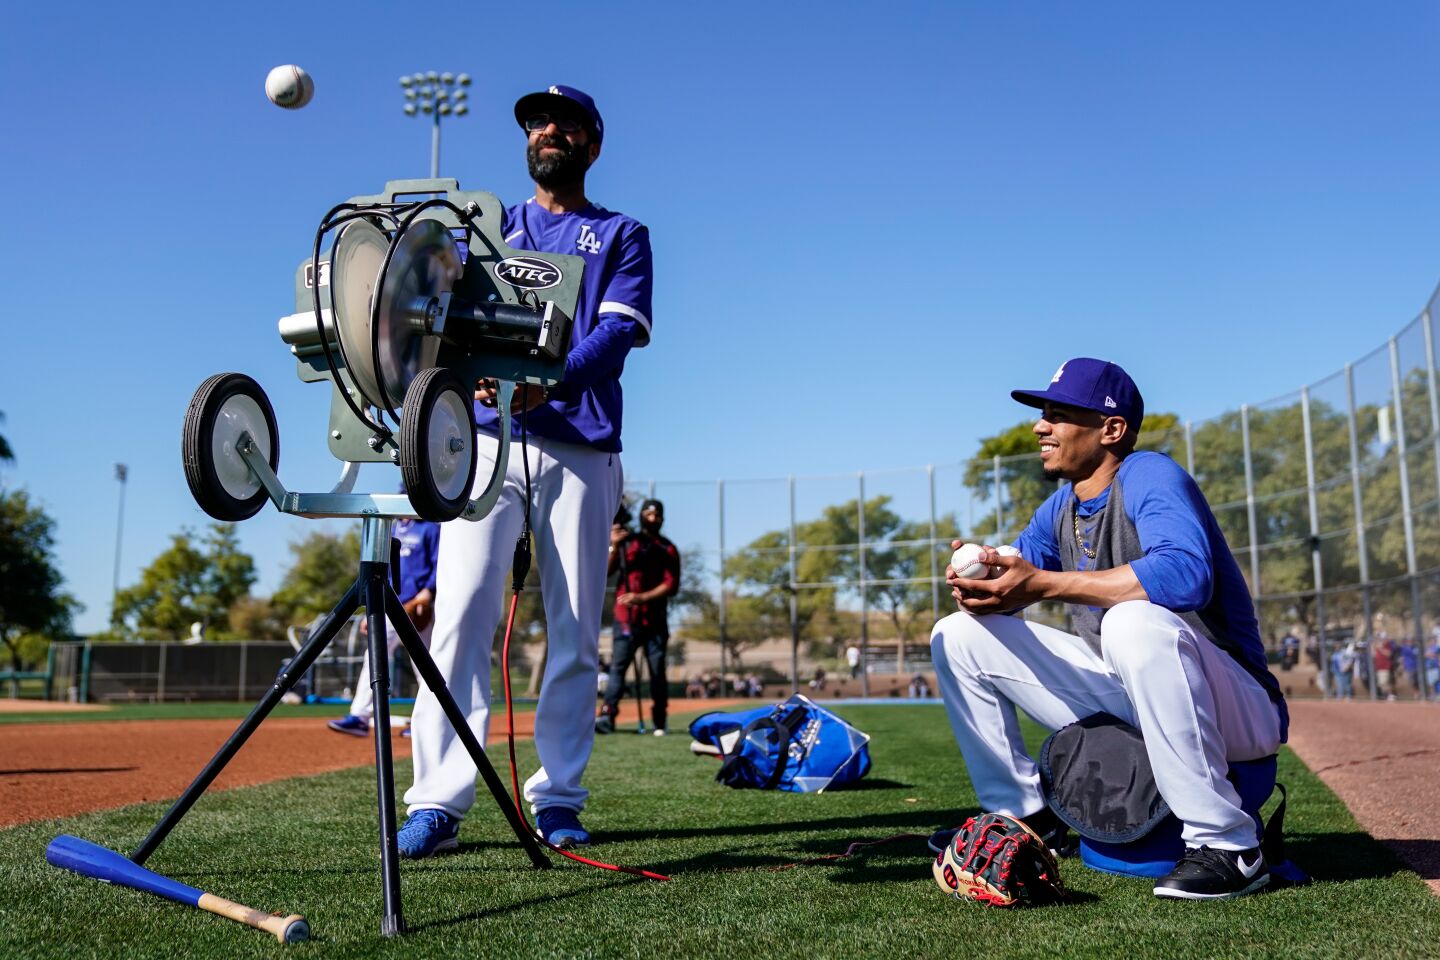 Dodgers right fielder Mookie Betts helps Rancho Cucamonga manager Mark Kertenian feed the machine during a fly ball drill at spring training.